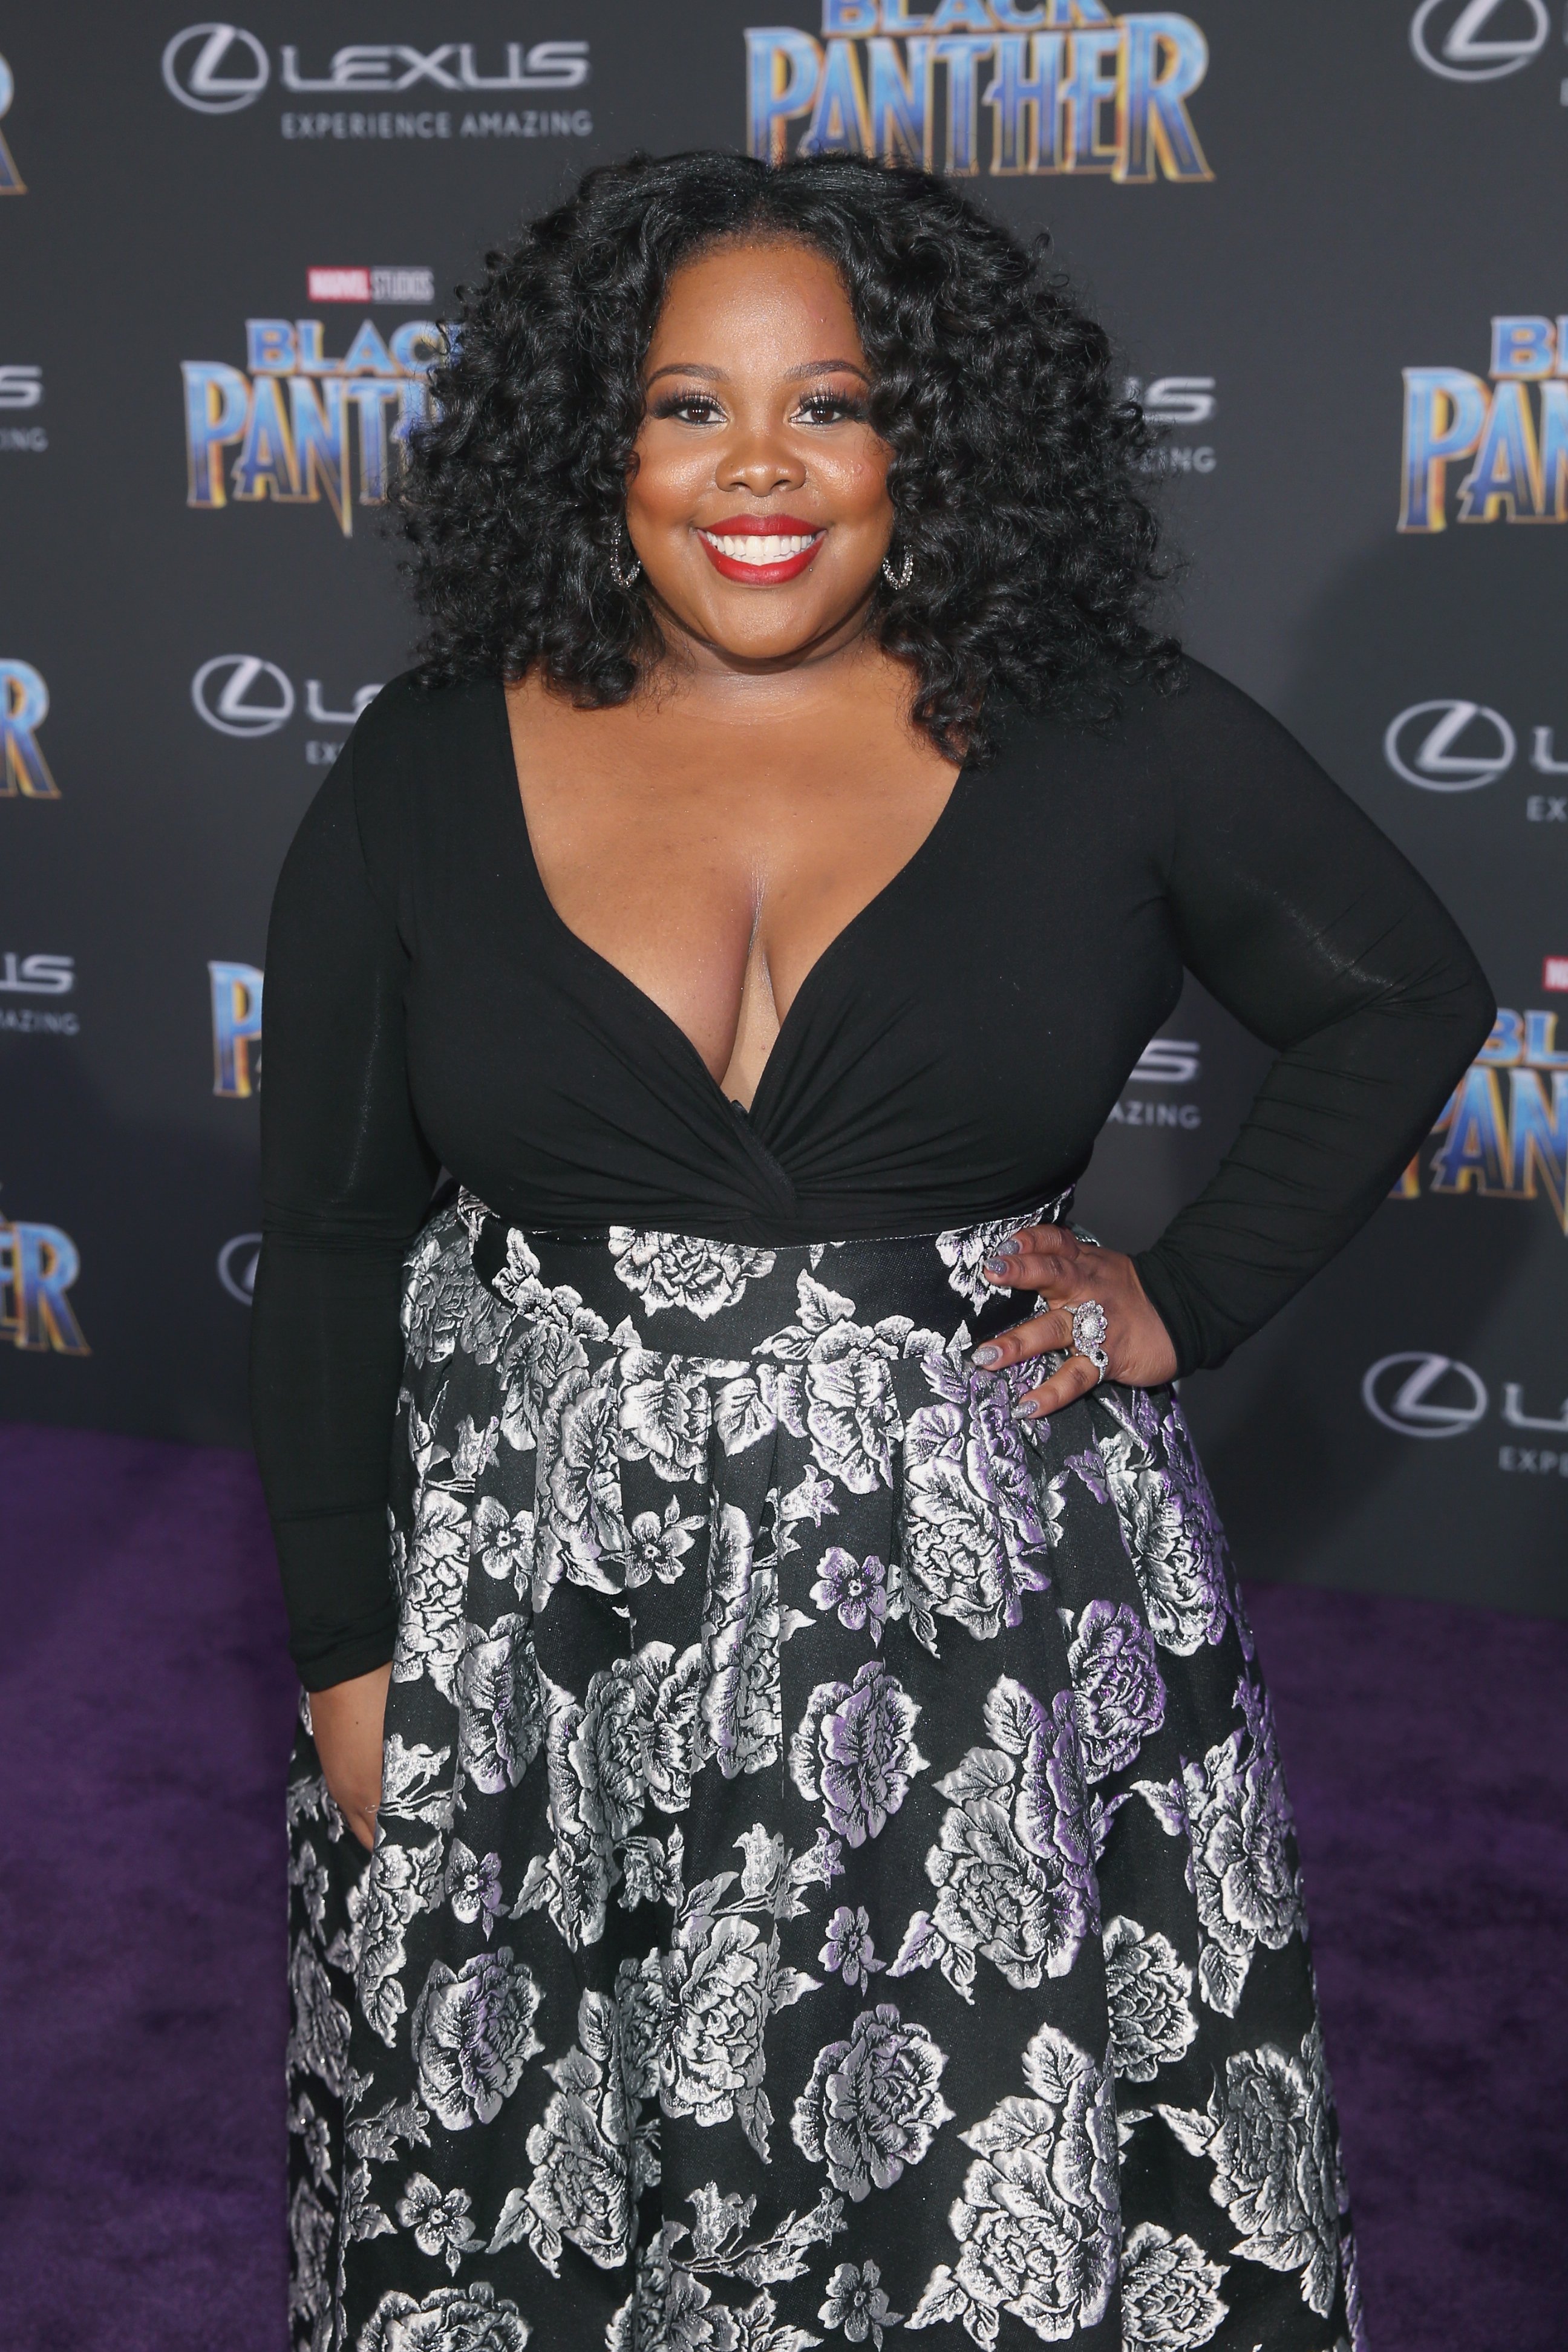 Amber Riley at the Los Angeles World Premiere of Marvel Studios' "Black Panther" on January 29, 2018 in Hollywood, California. | Source: Getty Images